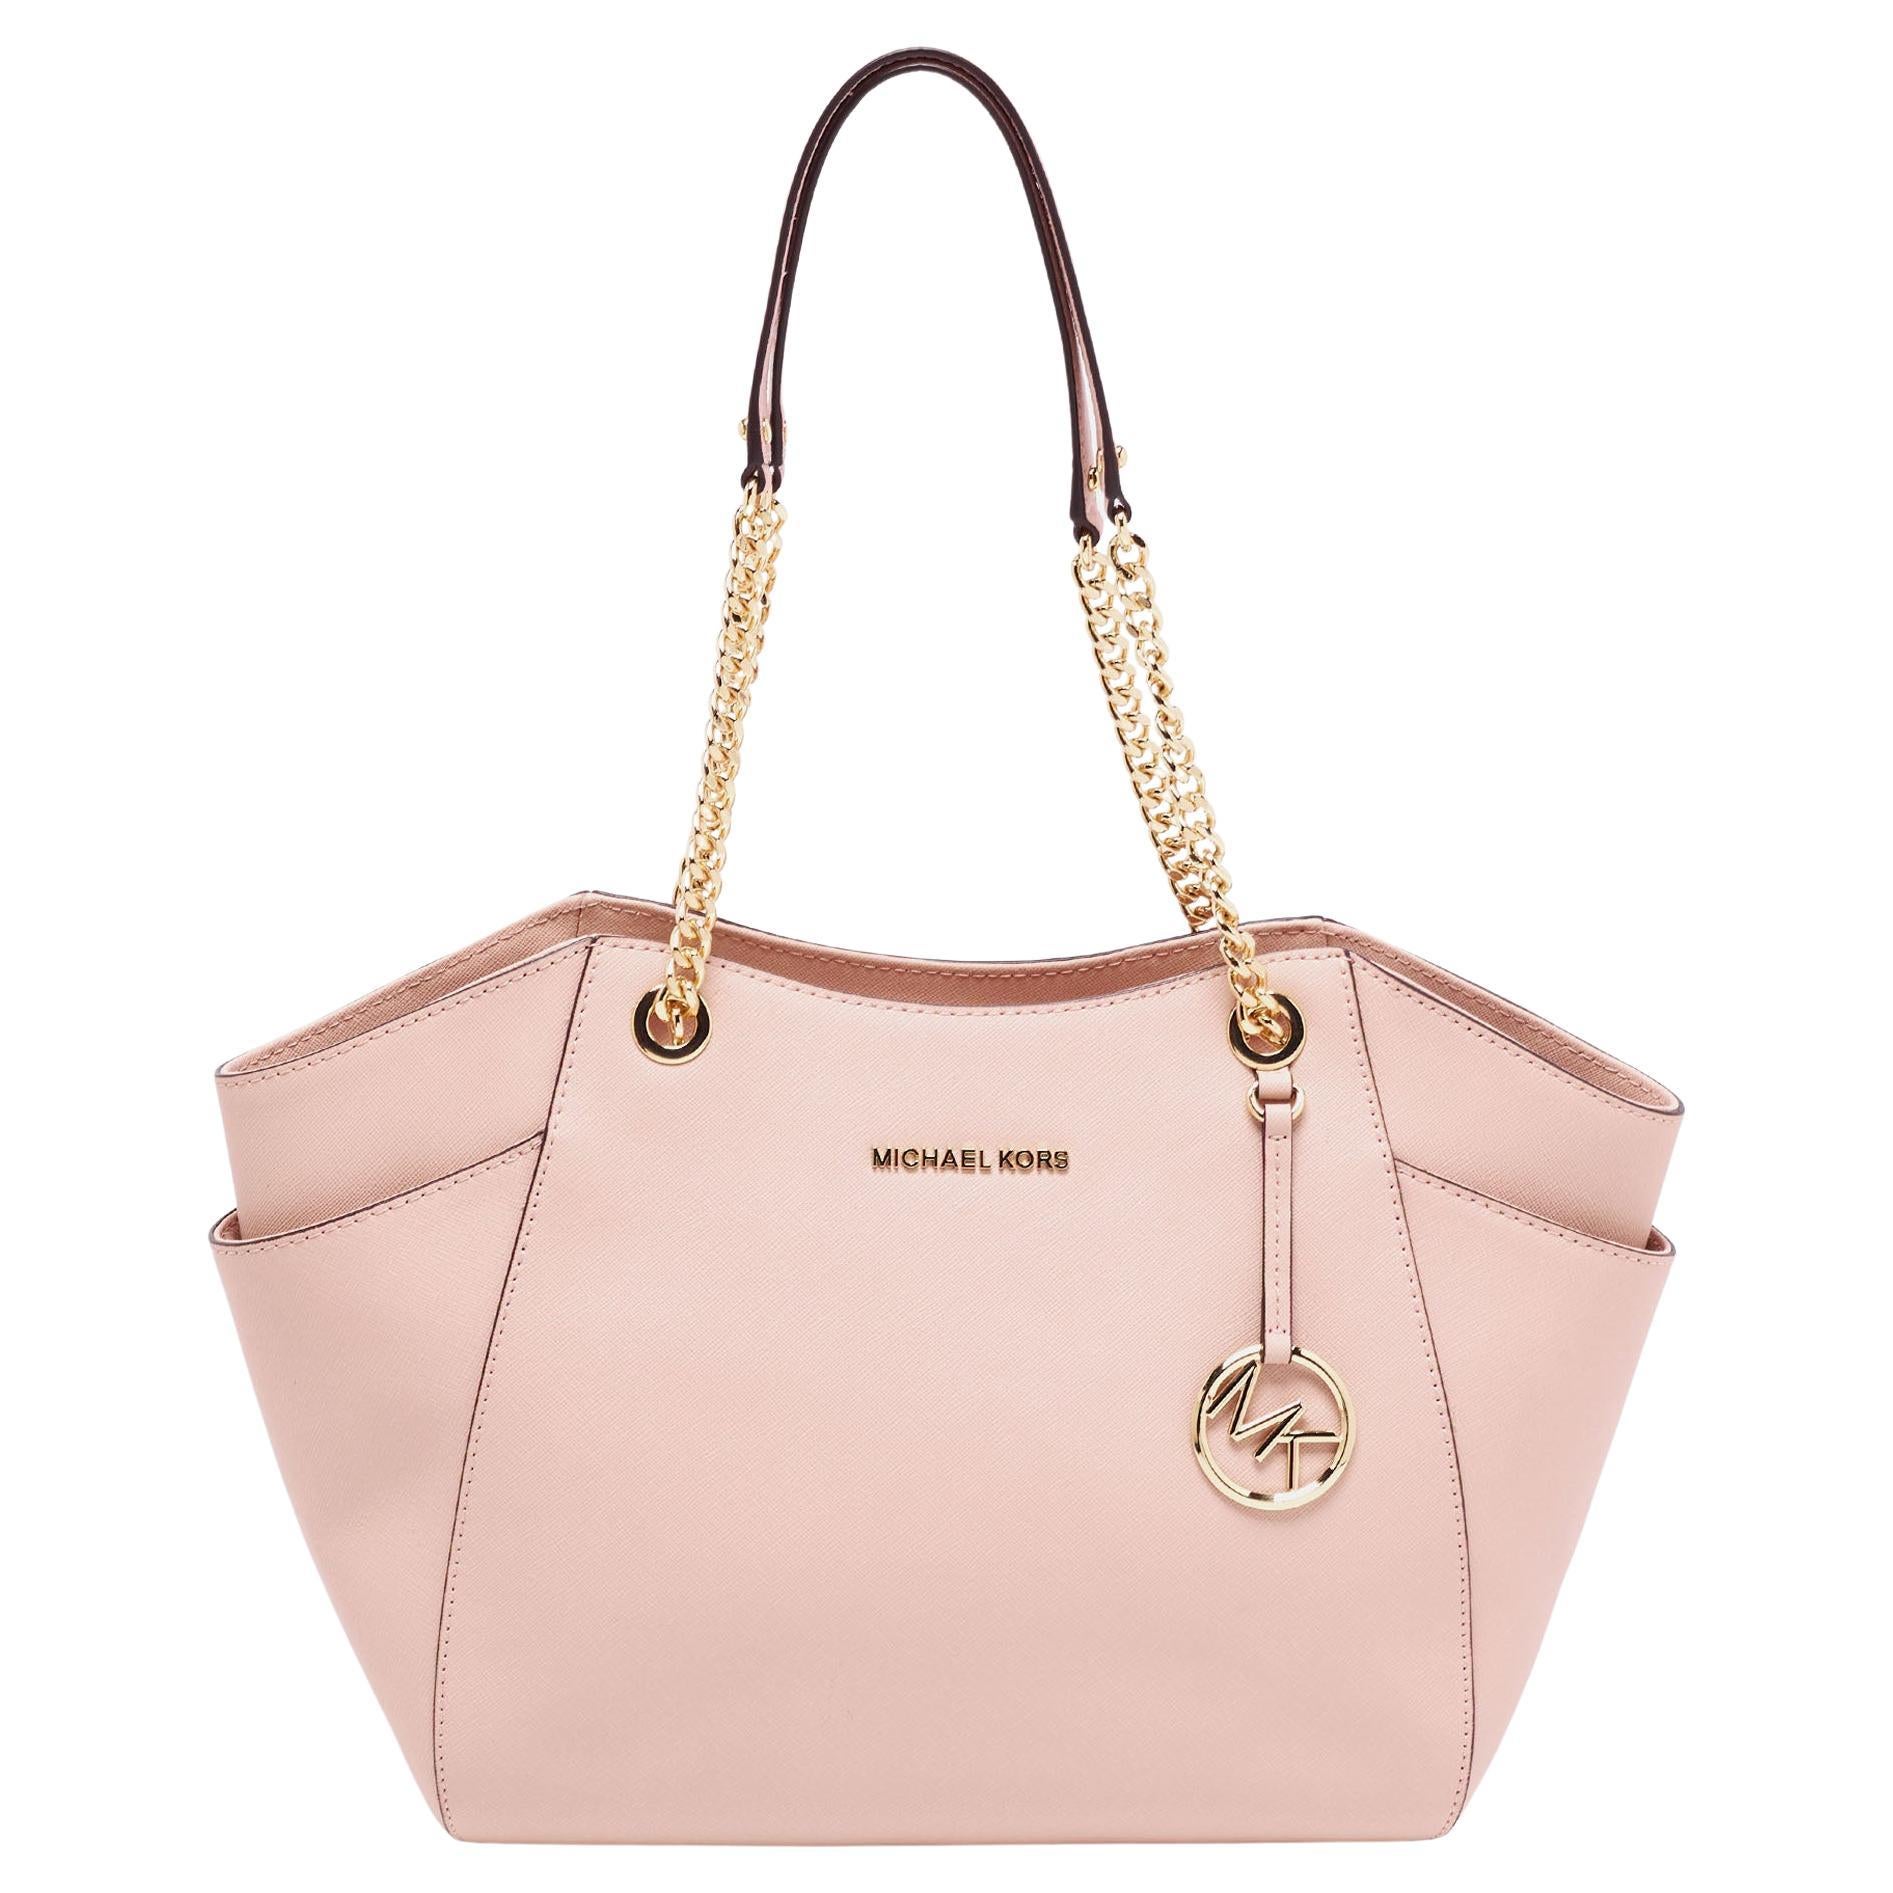 Michael Kors Pink Saffiano Leather Jet Set Travel Chain Tote